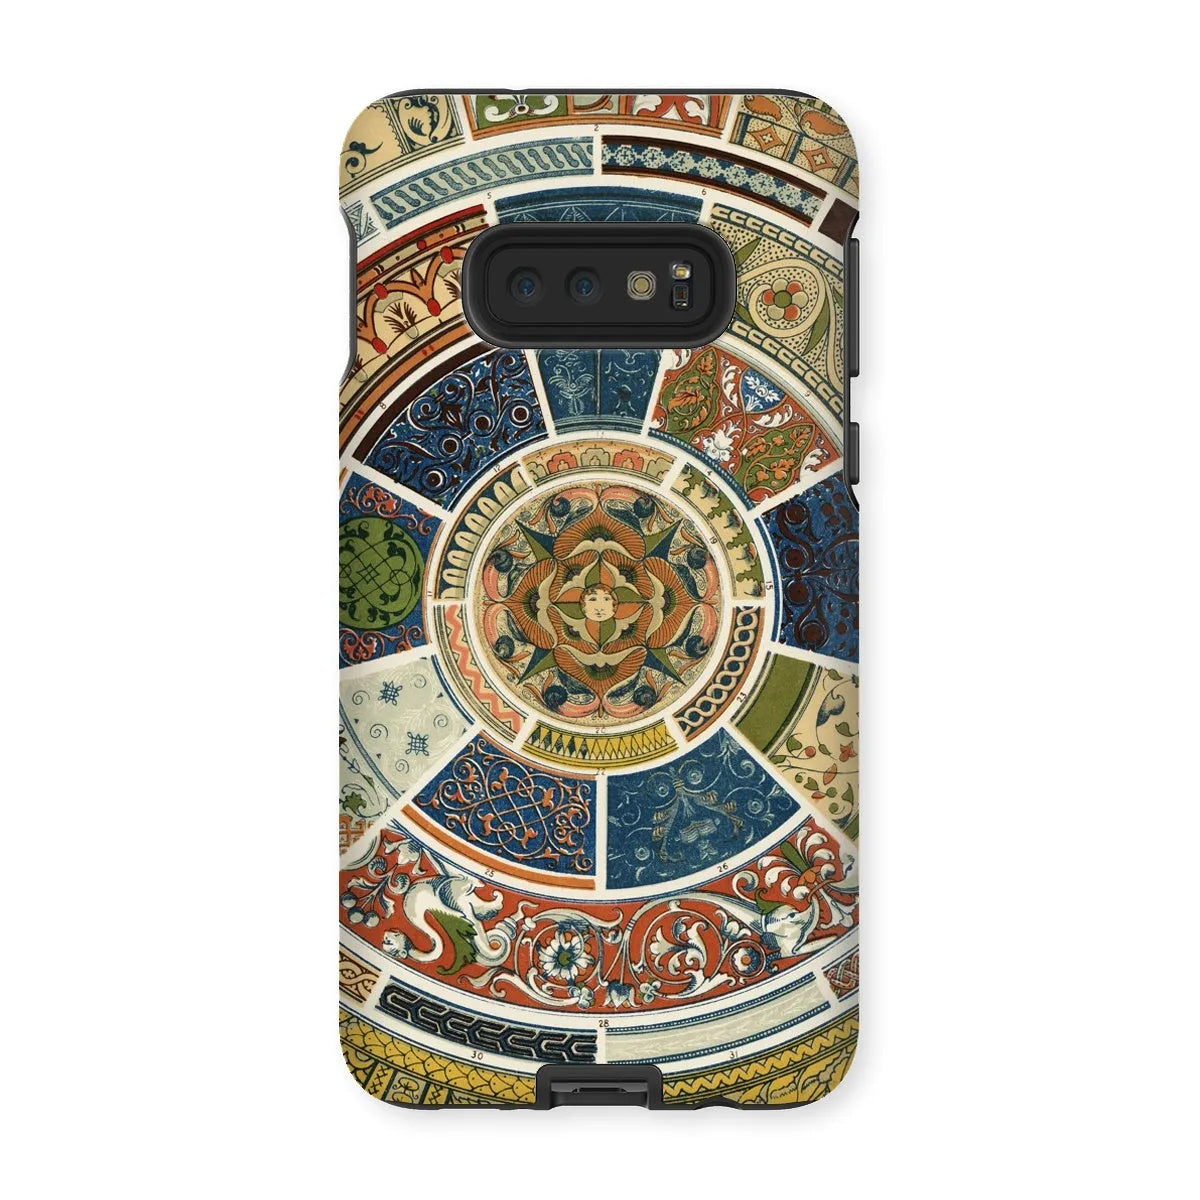 Another Grammar Of Ornament Aesthetic Pattern Art Phone Case - Samsung Galaxy S10e / Matte - Mobile Phone Cases